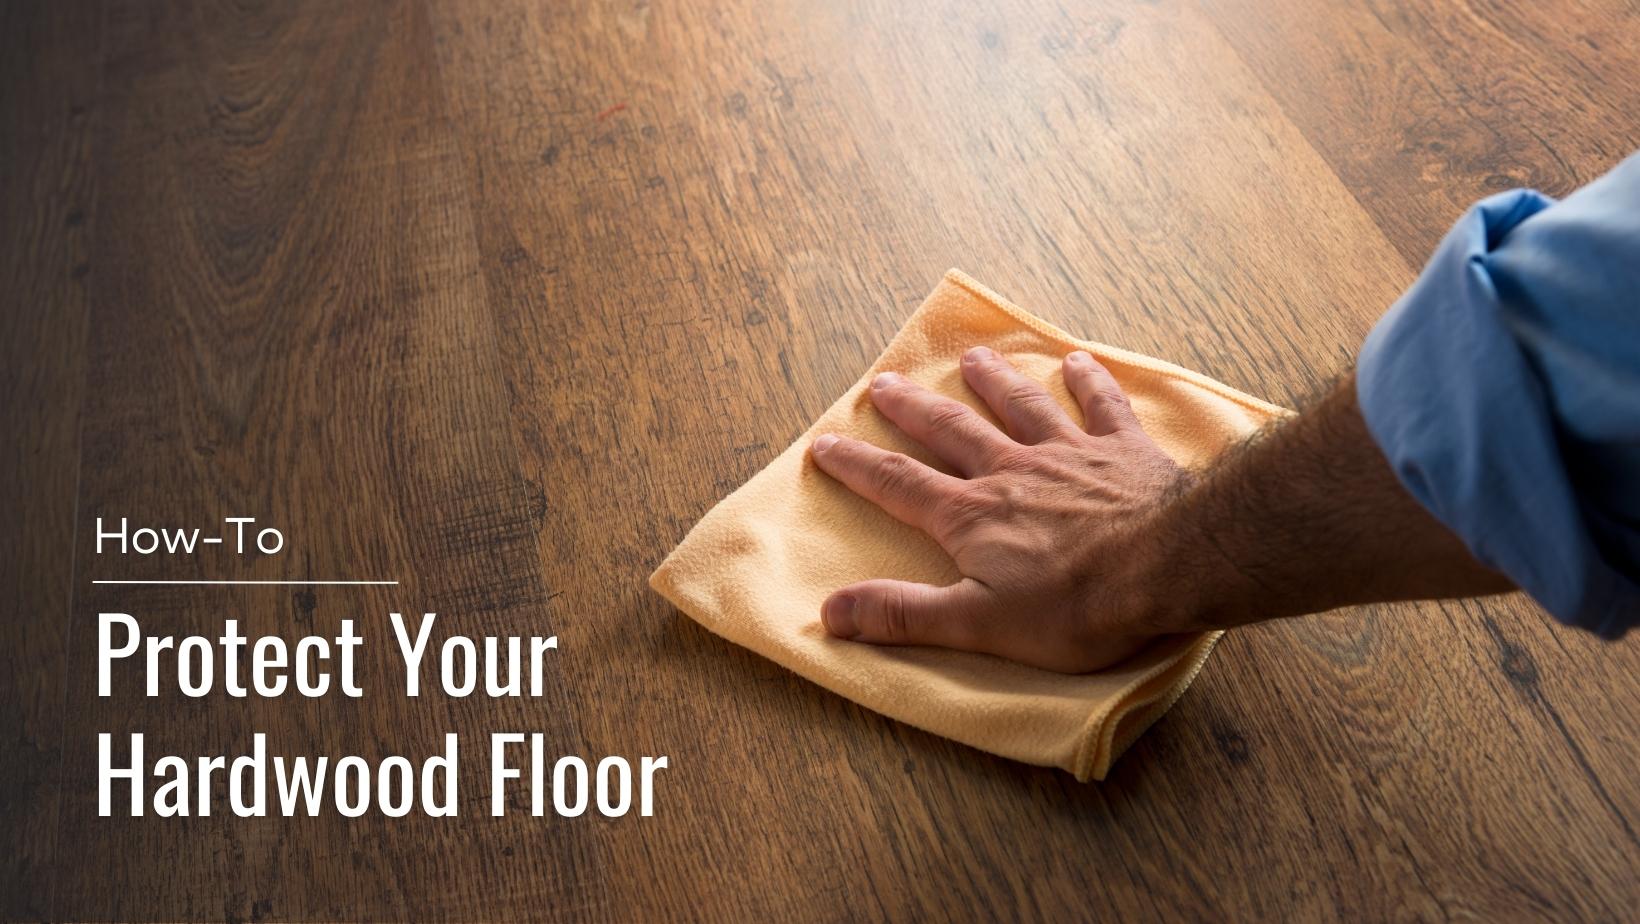 A man wiping the hardwood floor with a cloth